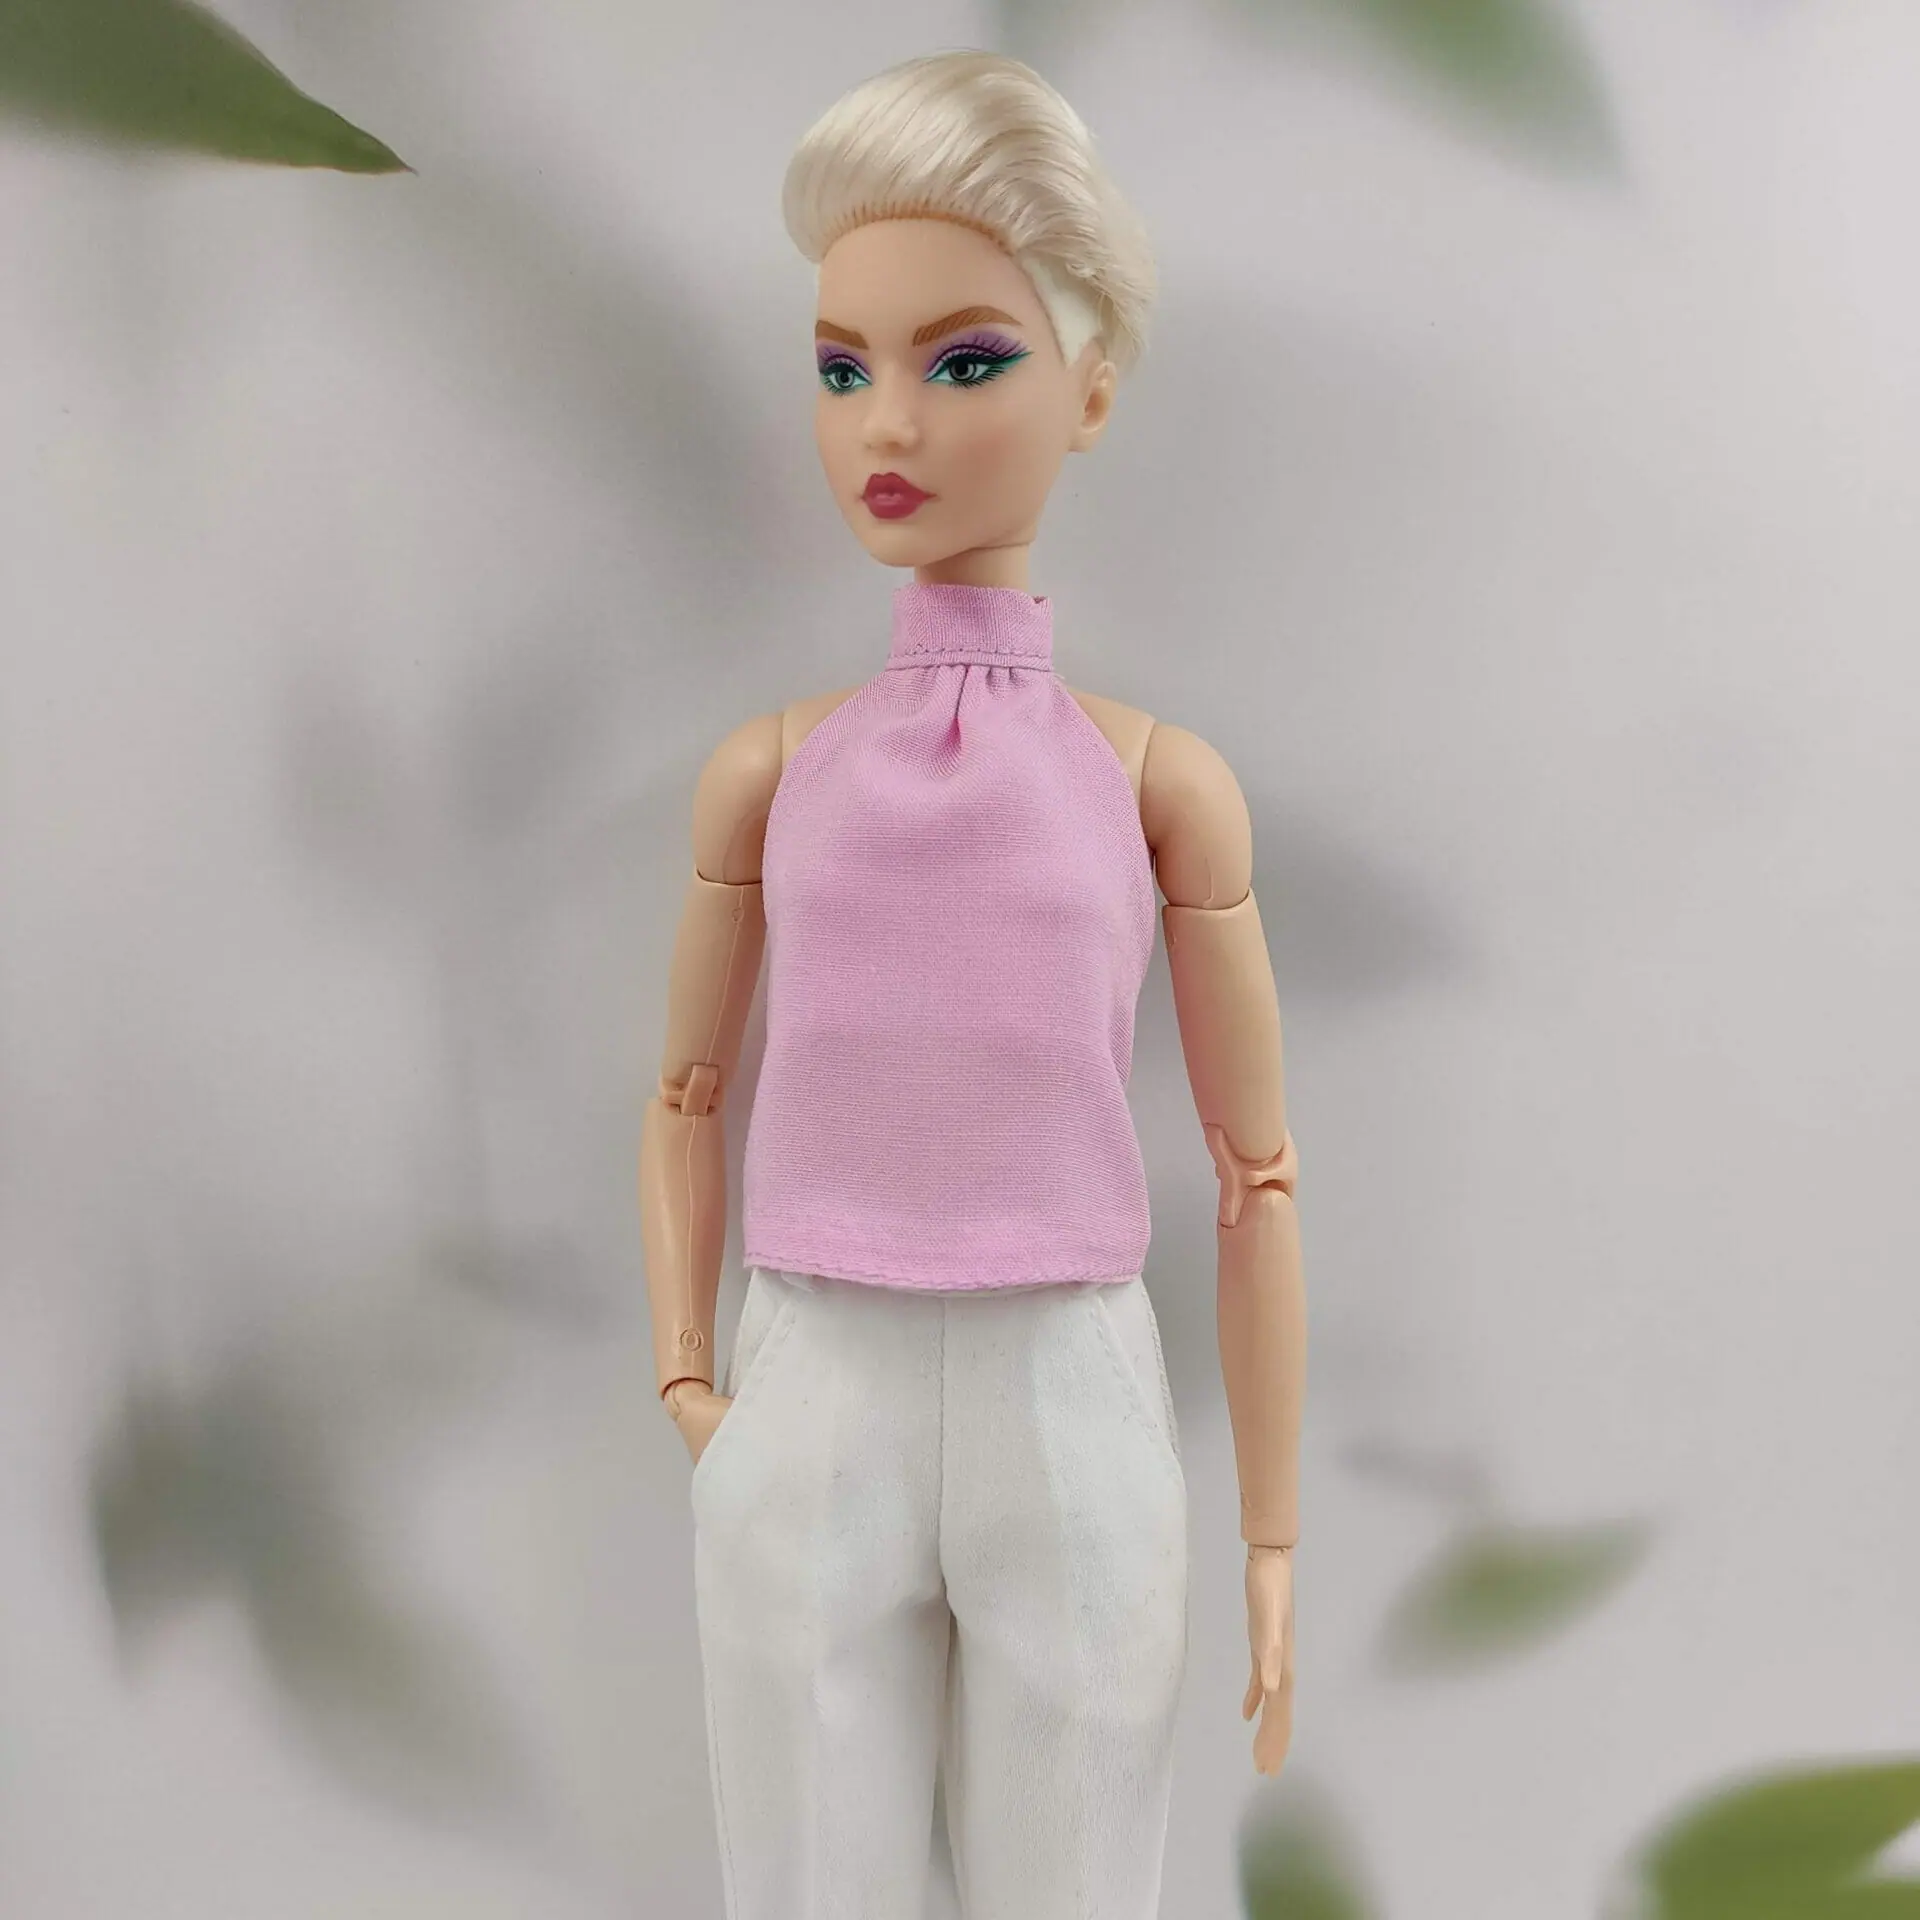 Barbie doll clothes | Barbie pink top